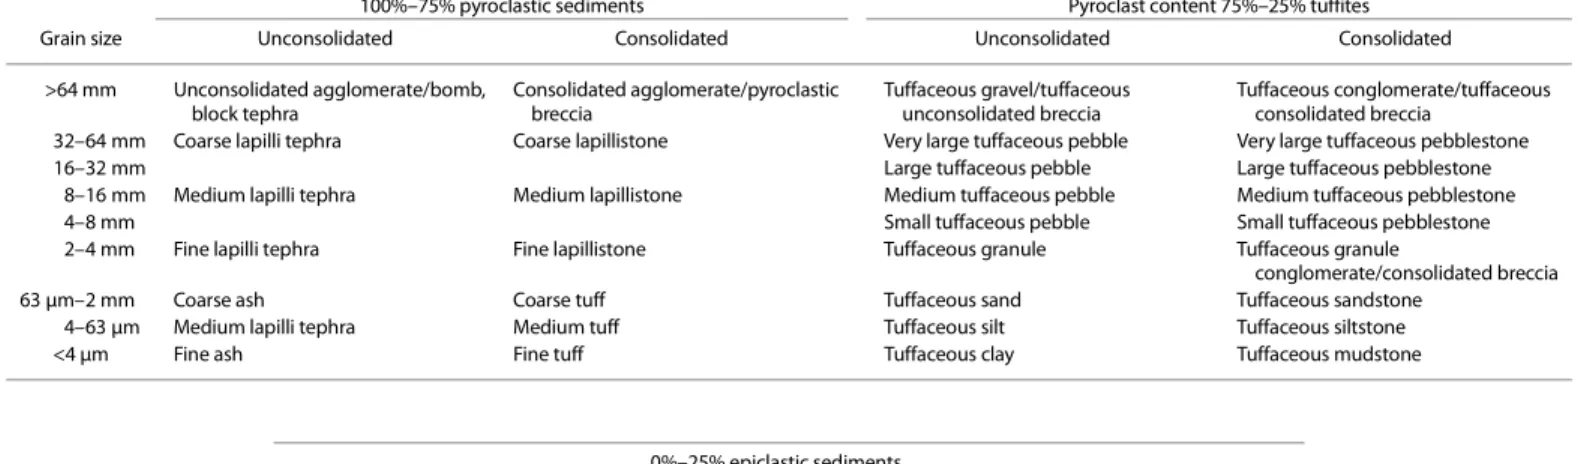 Table T2. Classification scheme for volcaniclastic sediments, after Wentworth (1922), Fisher and Schmincke (1984), and Bates and Jackson (1987); adapted for  consistency between pyroclastic and epiclastic rocks